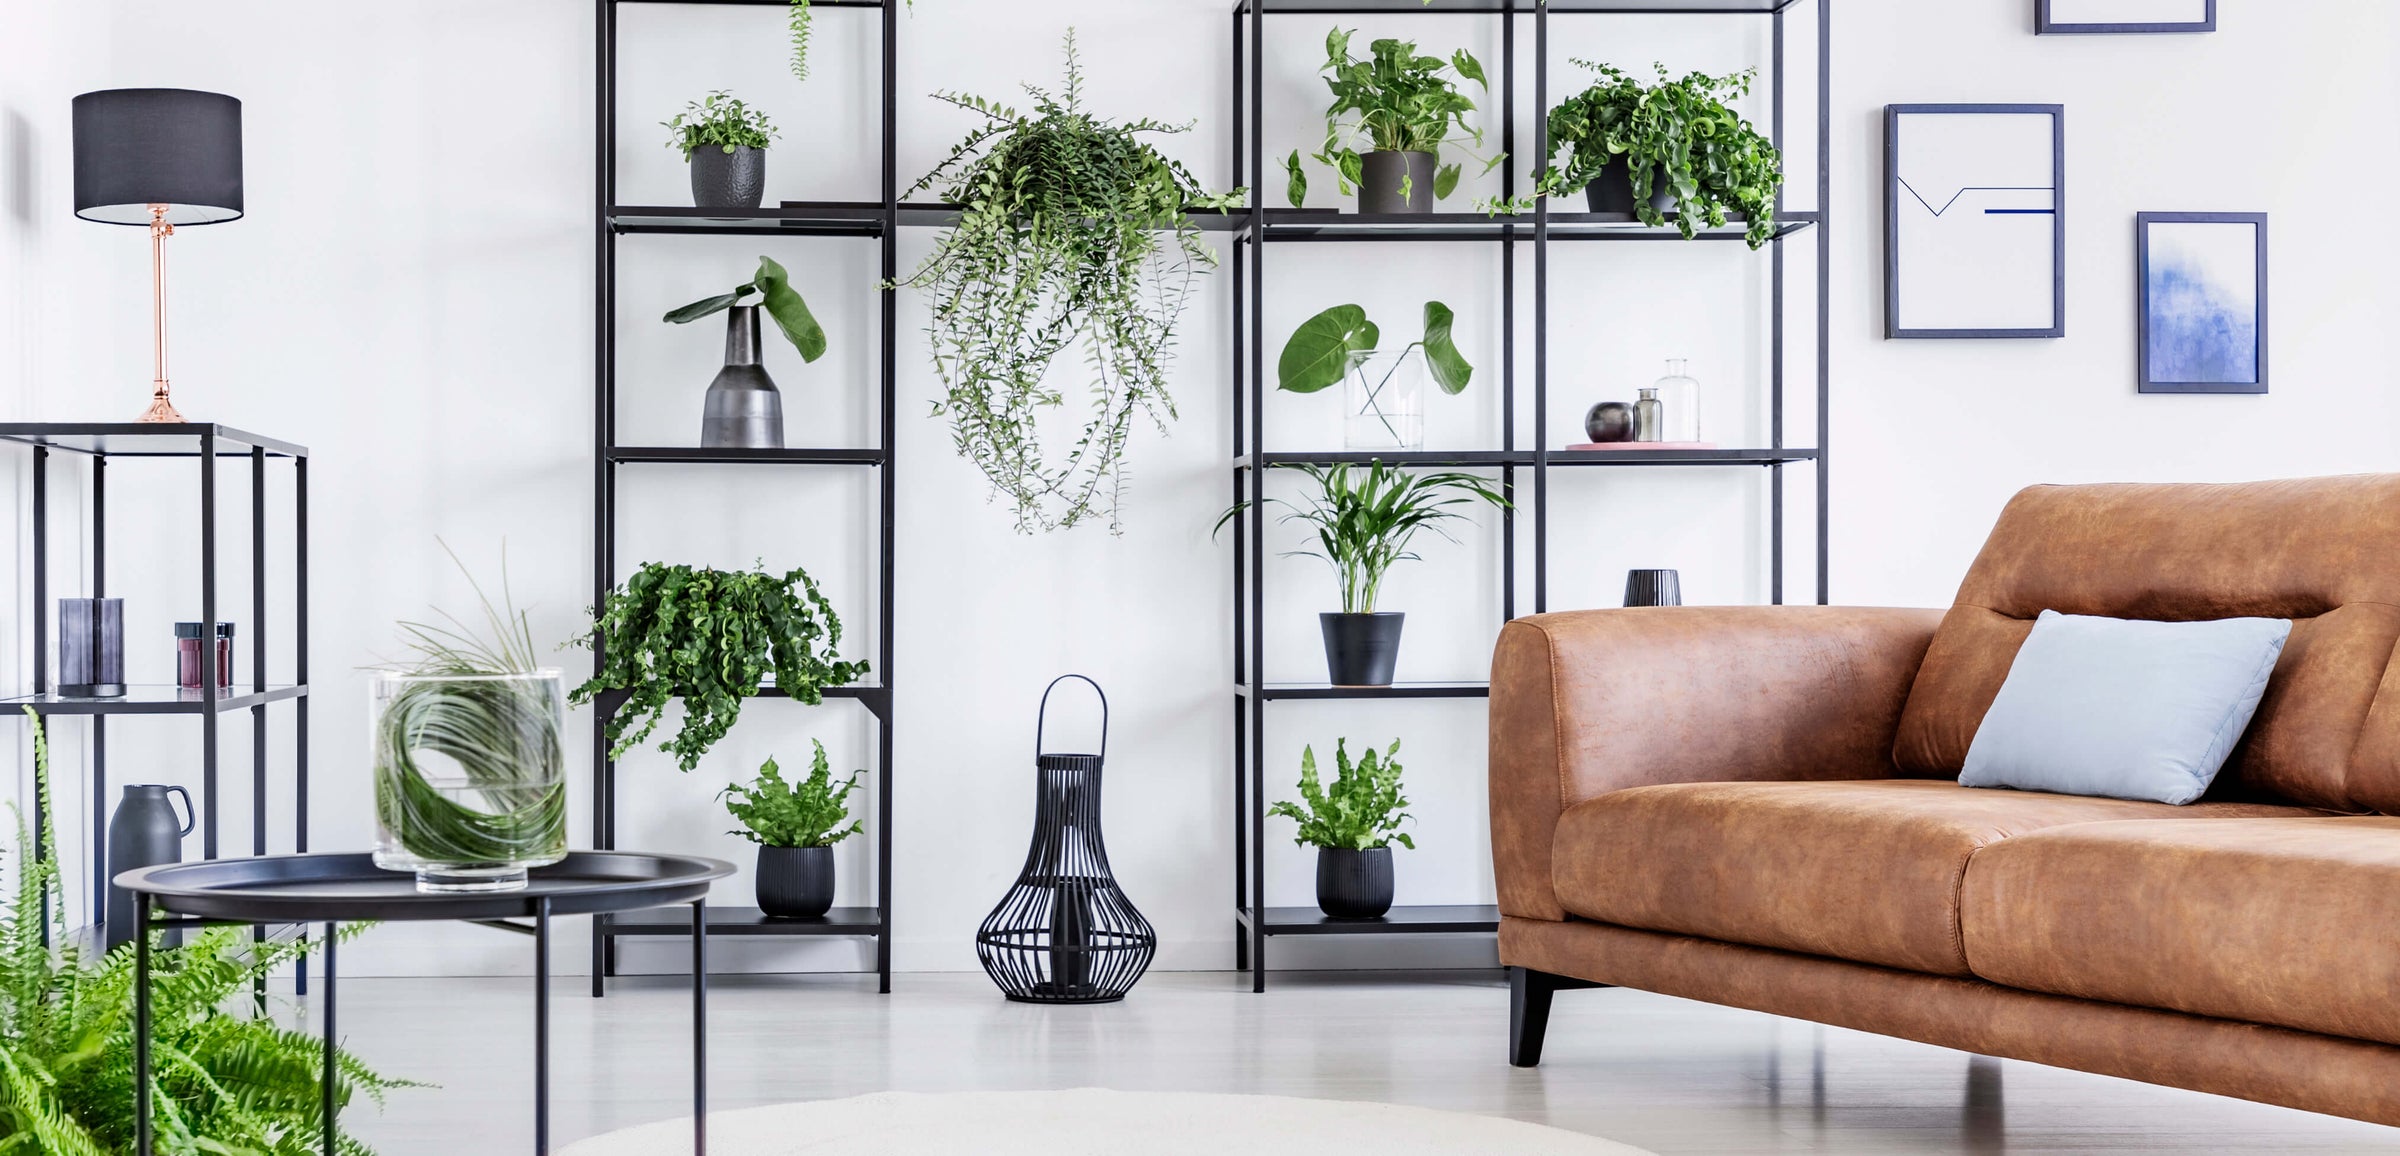 Bright living room filled with plants and home décor